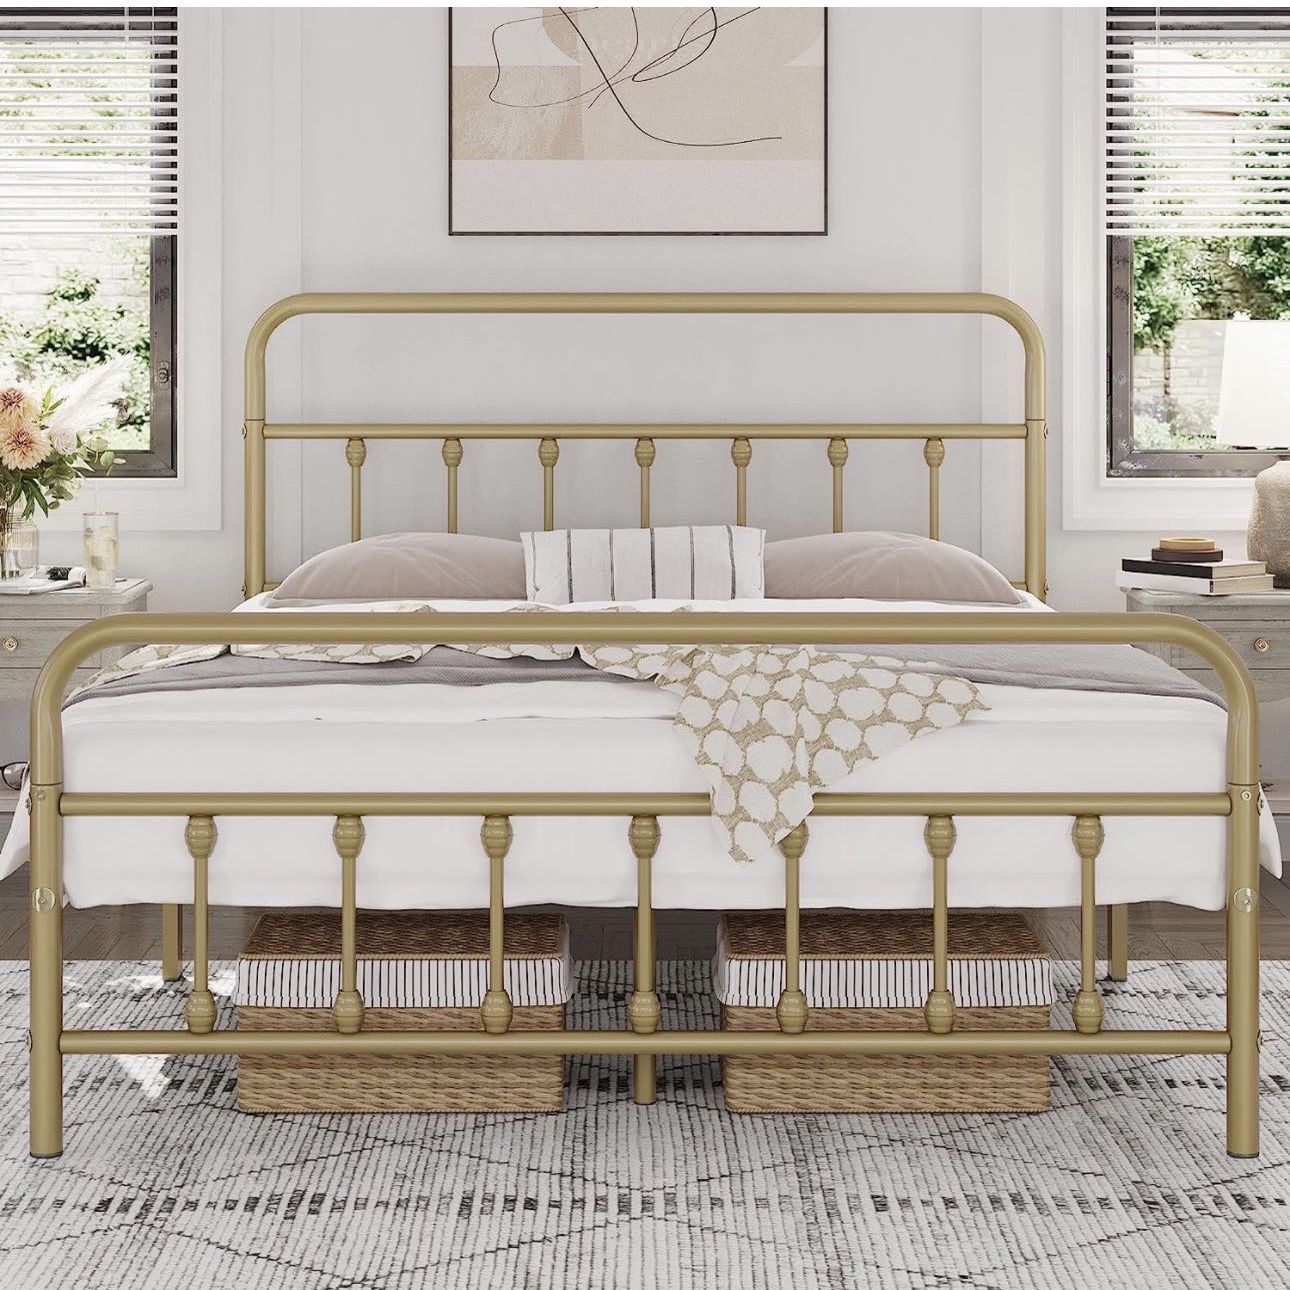 Classic Metal Platform Bed Frame Mattress Foundation with Victorian Style Iron-Art Headboard/Footboard/Under Bed Storage No Box Spring Needed Full Siz